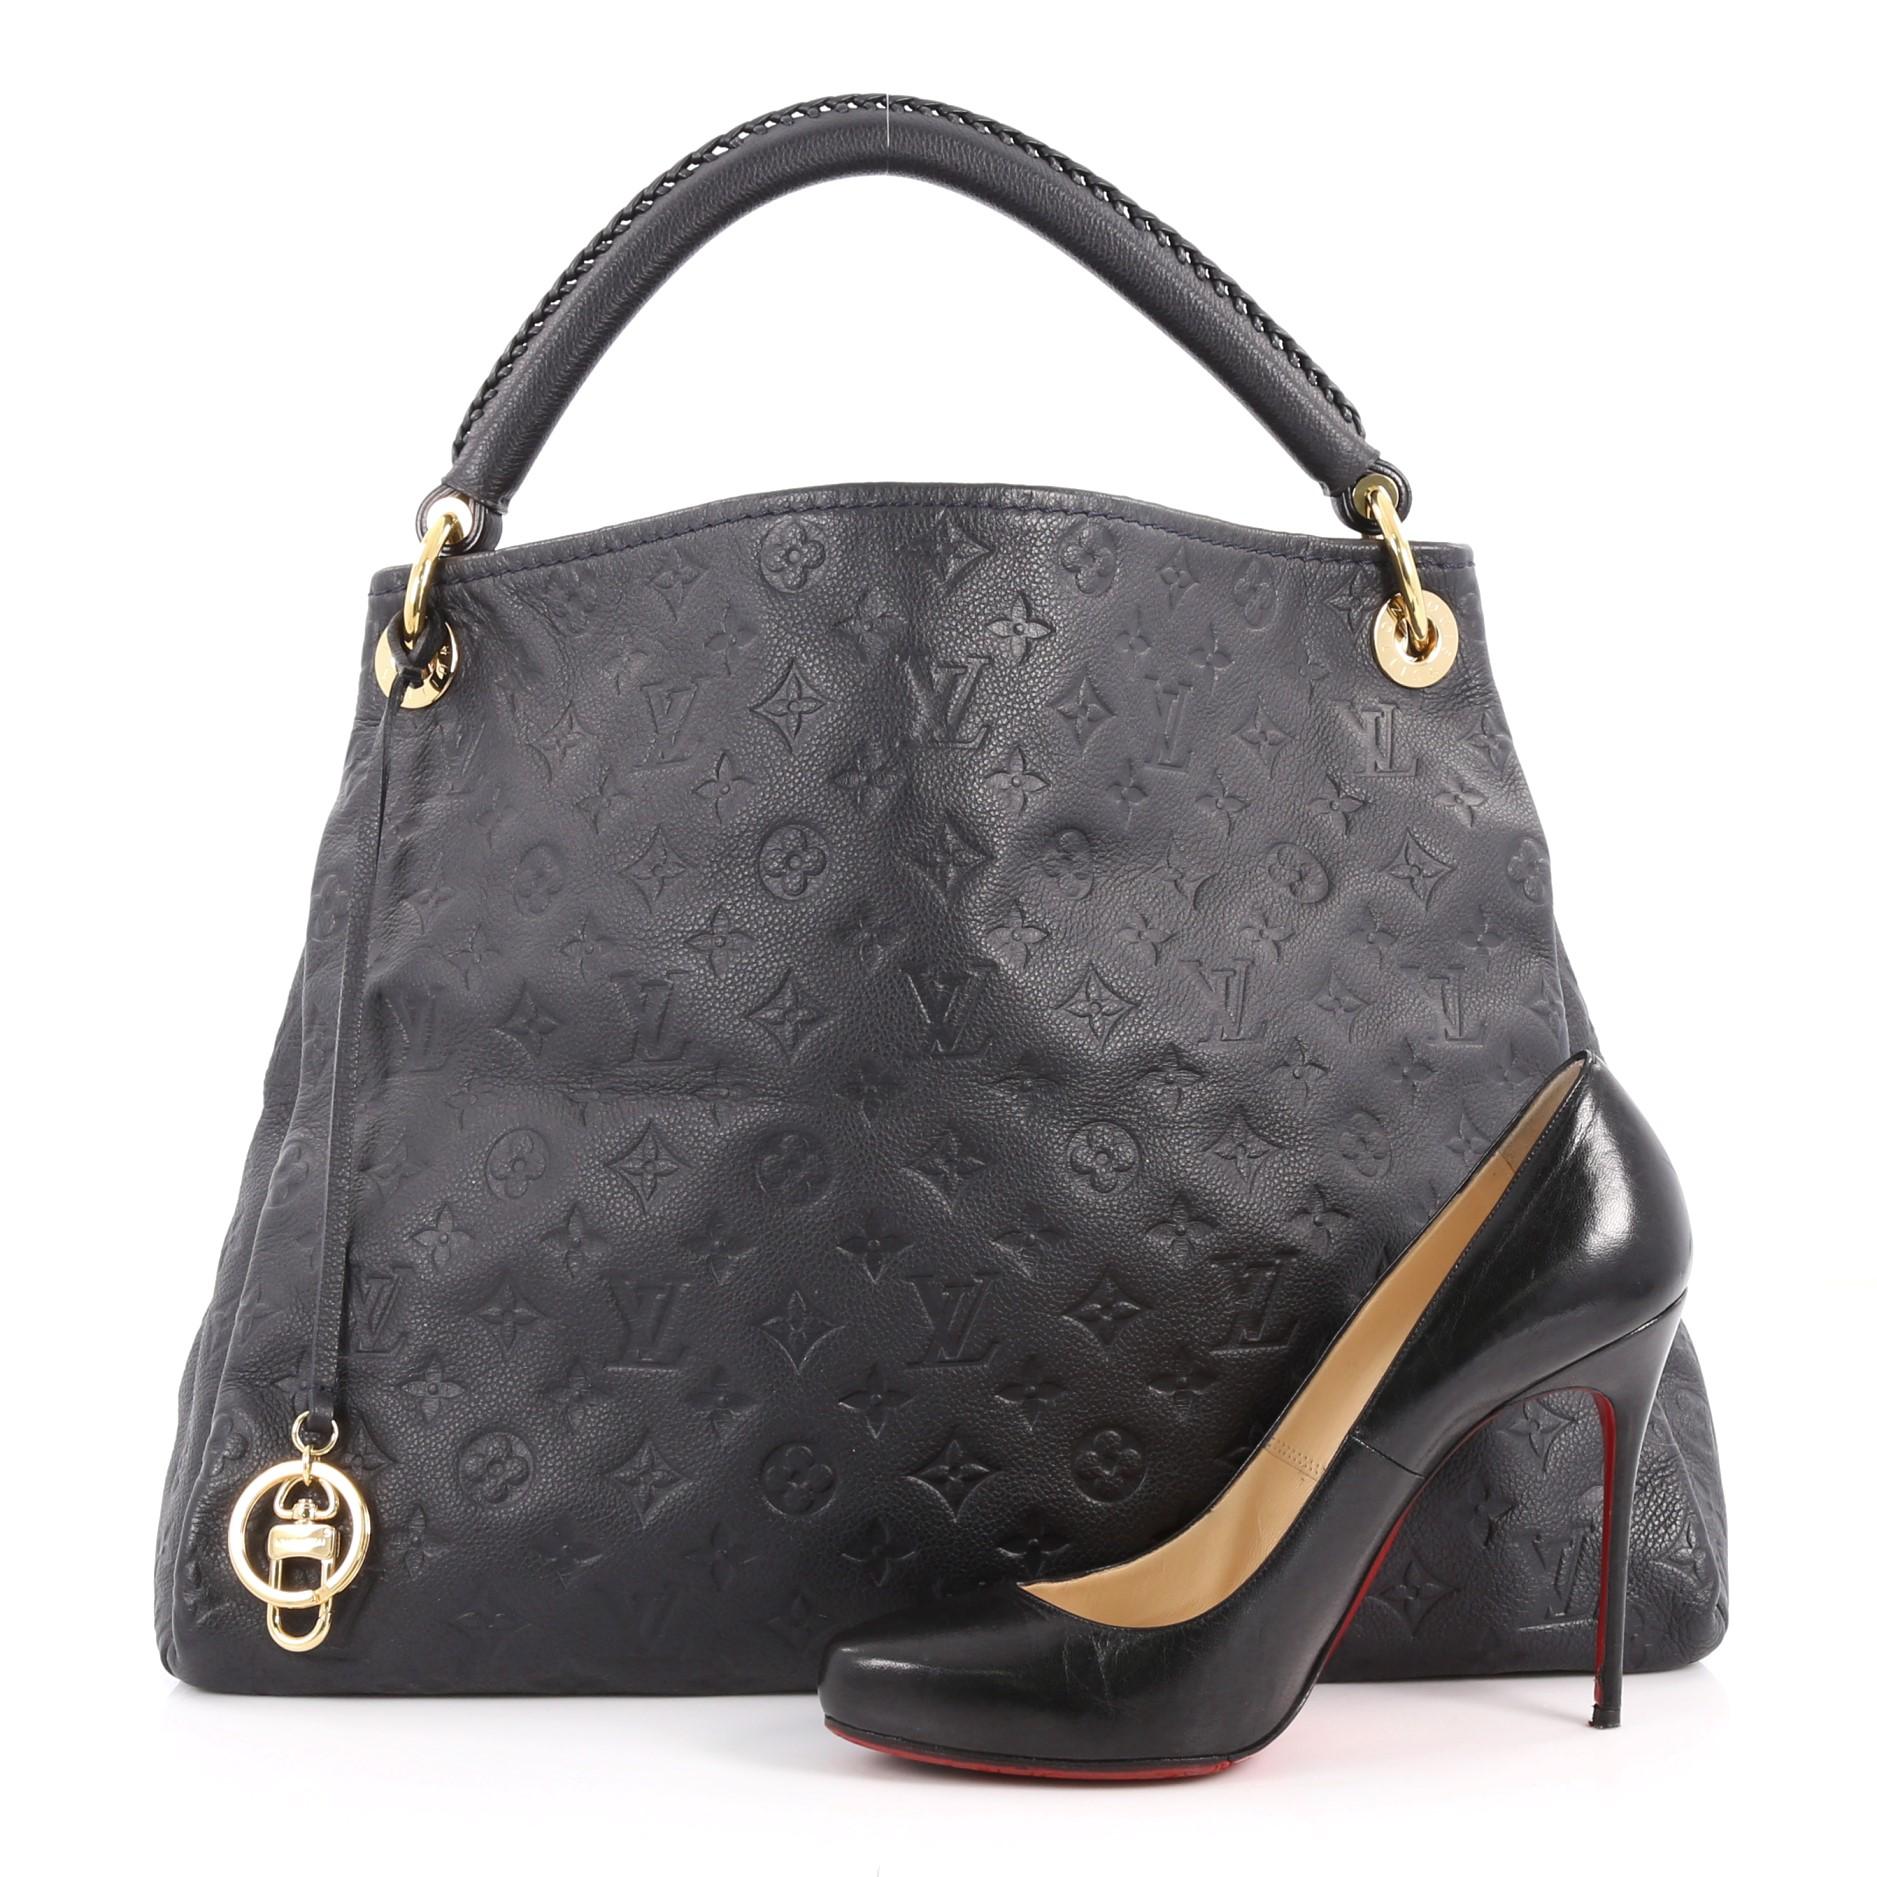 This authentic Louis Vuitton Artsy Handbag Monogram Empreinte Leather MM is an iconic hobo. Crafted from navy monogram embossed empreinte leather, this luxurious and refined hobo features a single looped braided top handle with polished gold links,